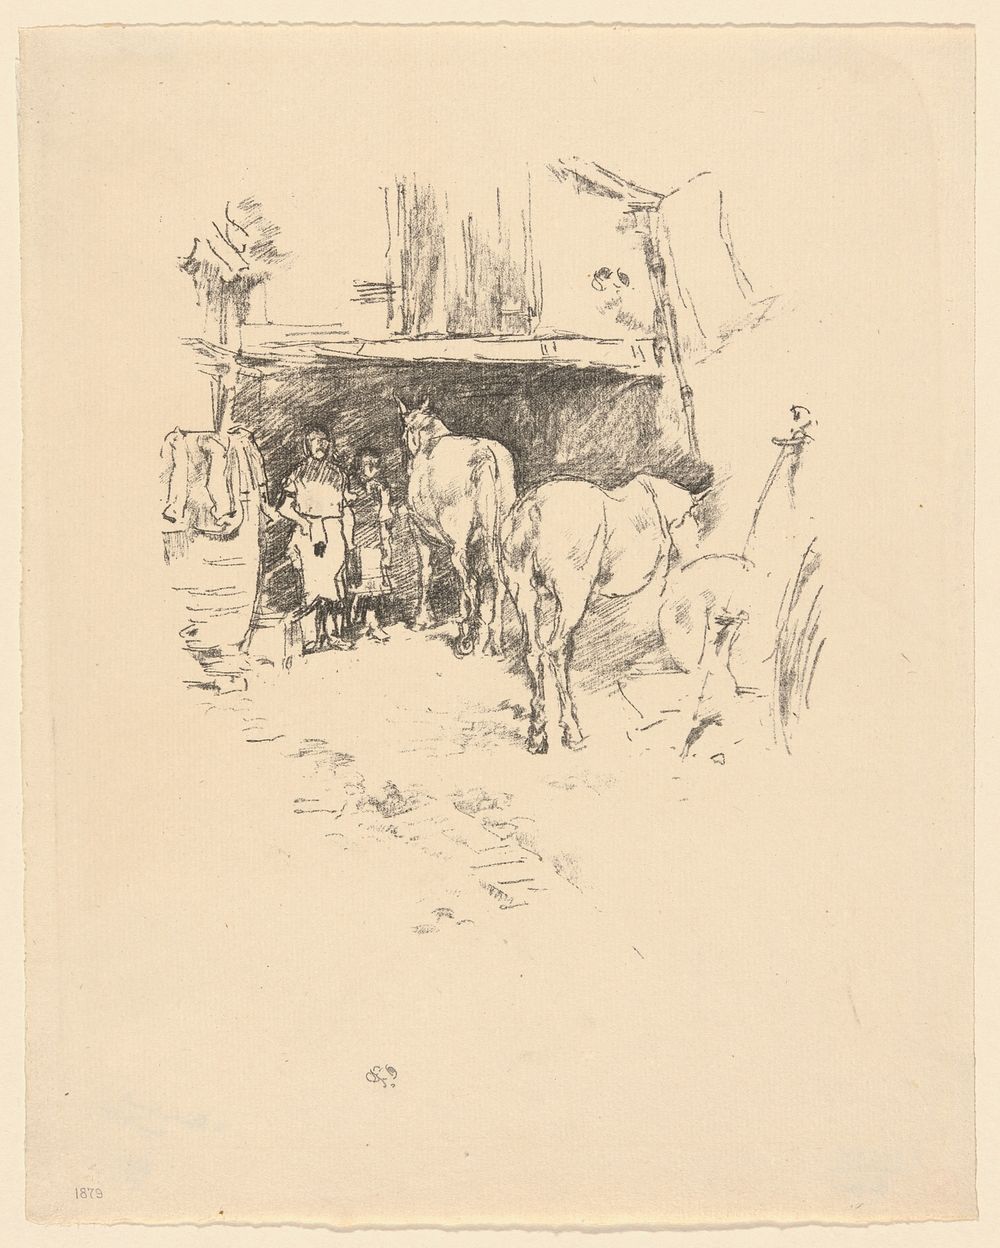 The Smith's Yard by James McNeill Whistler